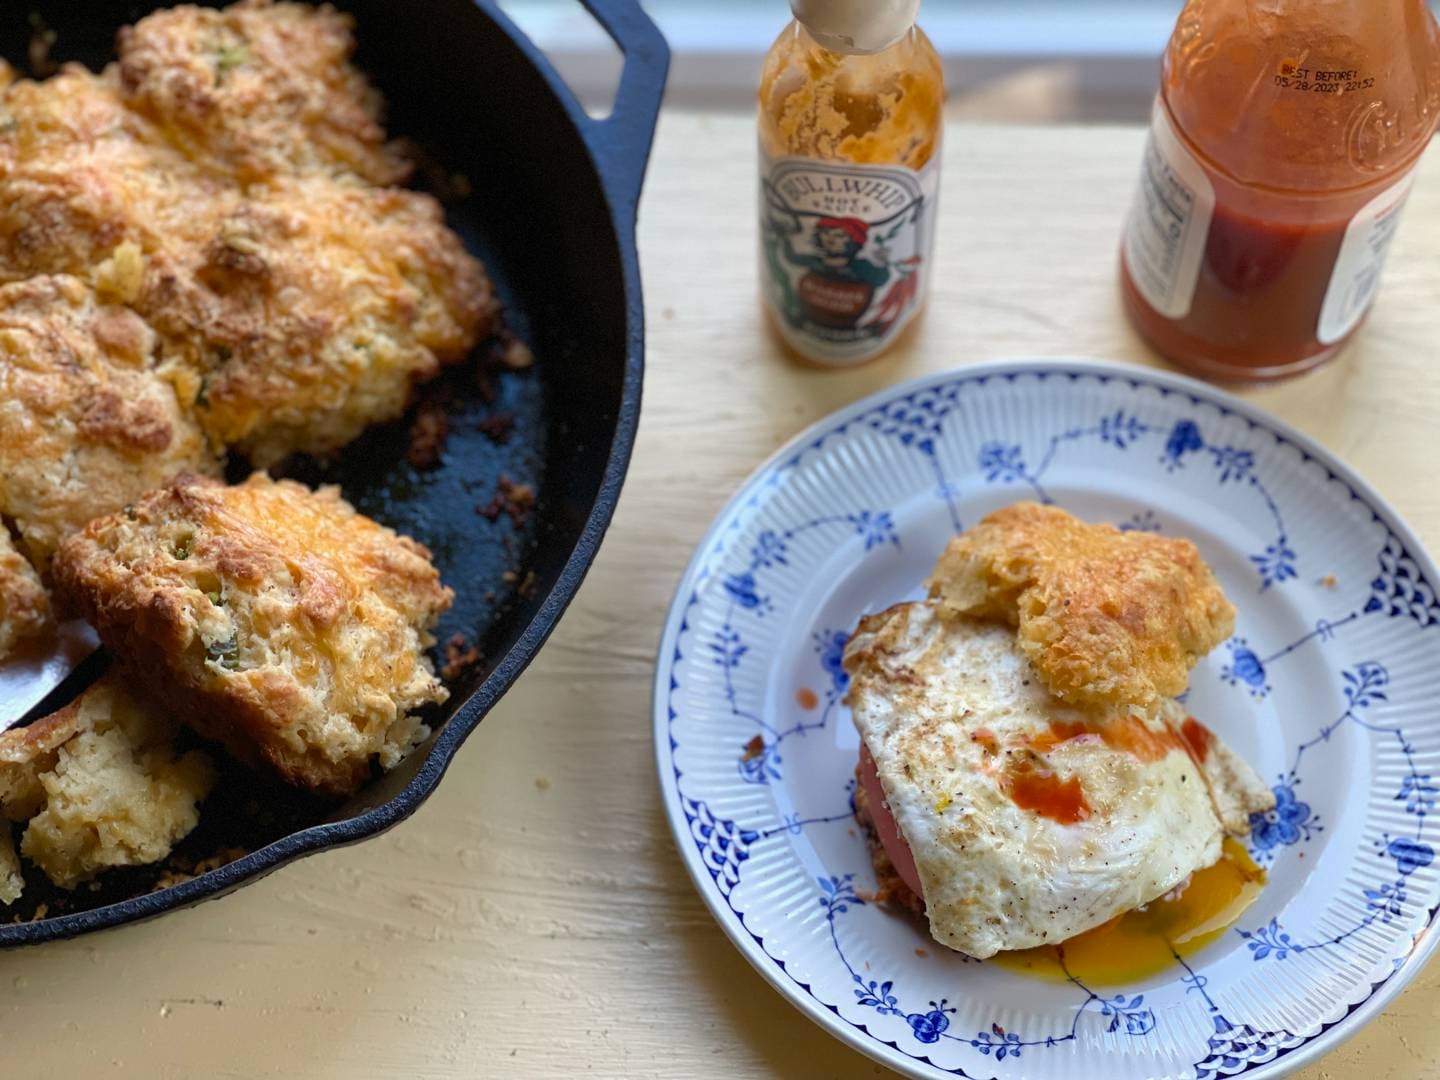 Fried egg sandwich made with cheddar jalapeño biscuits